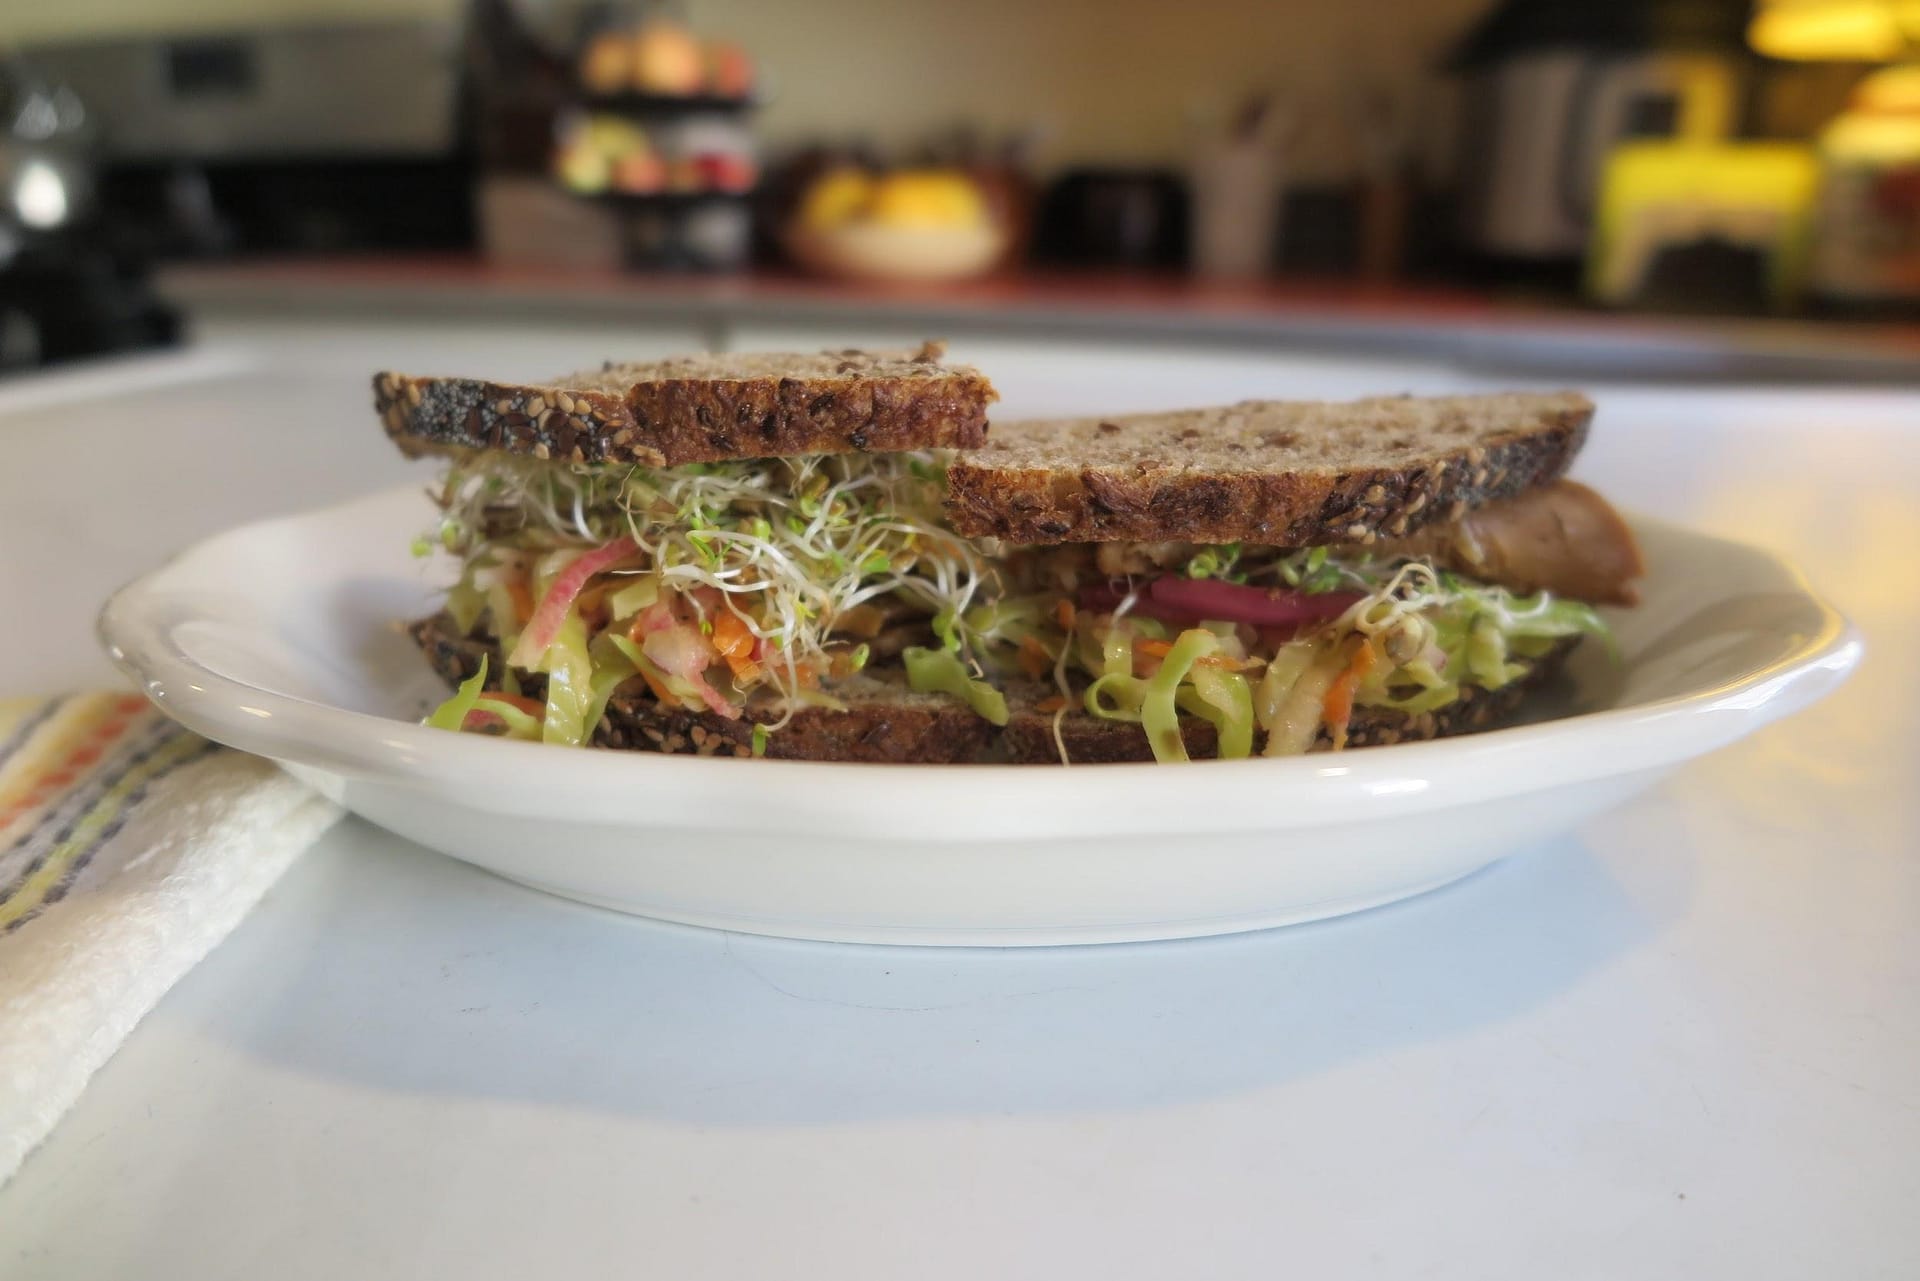 Profile shot of a sandwich with the coleslaw on a white plate.